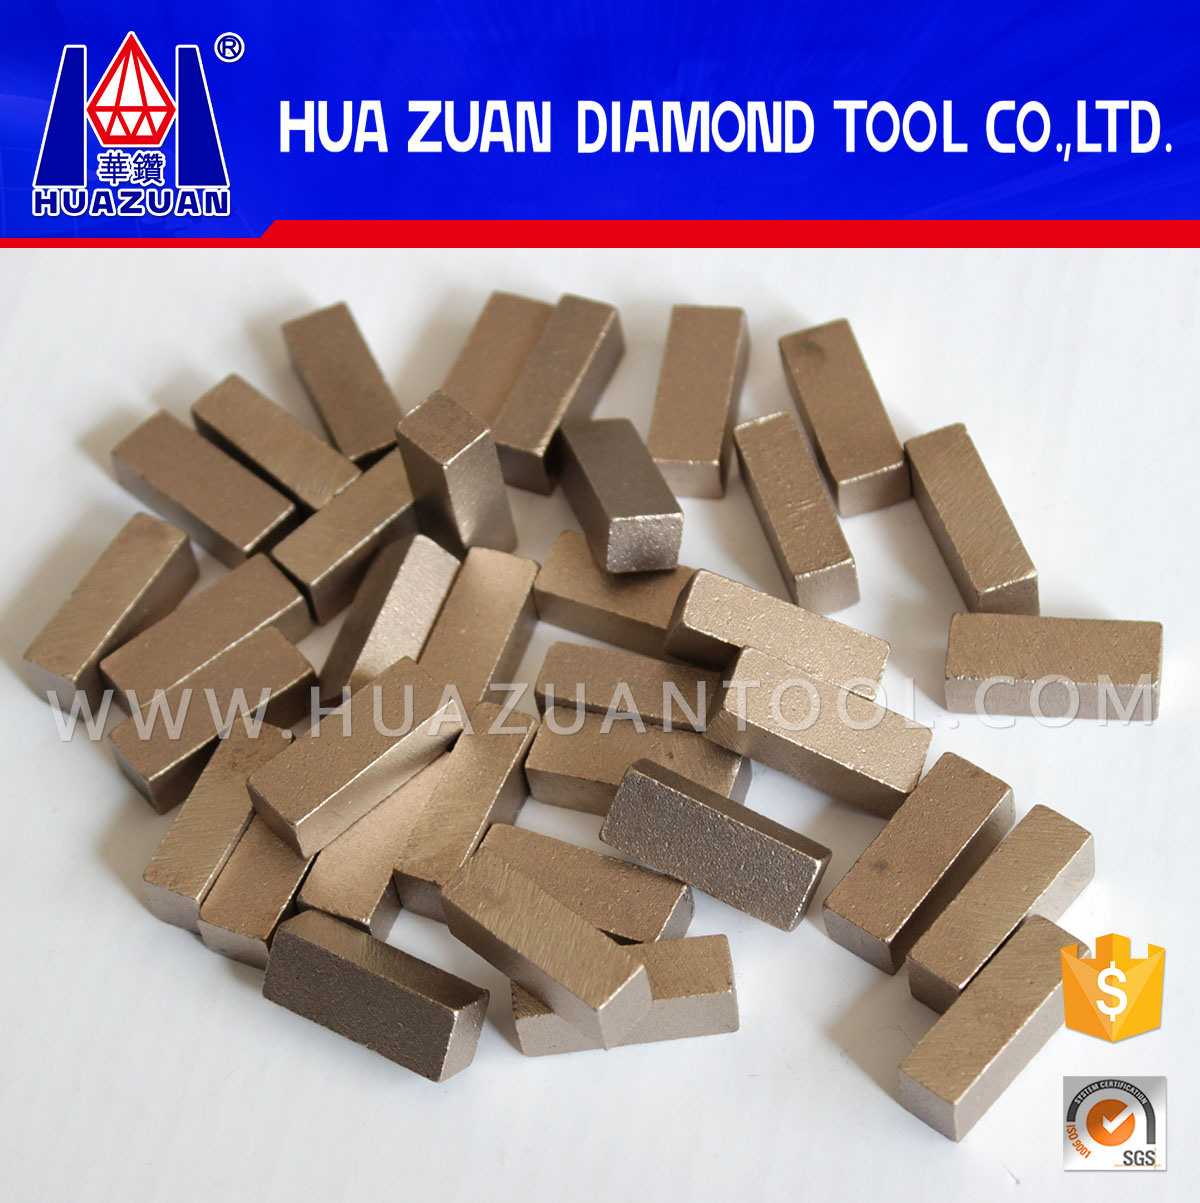 High Efficiency 1 Meter Diamond Segments for Cutting Marble